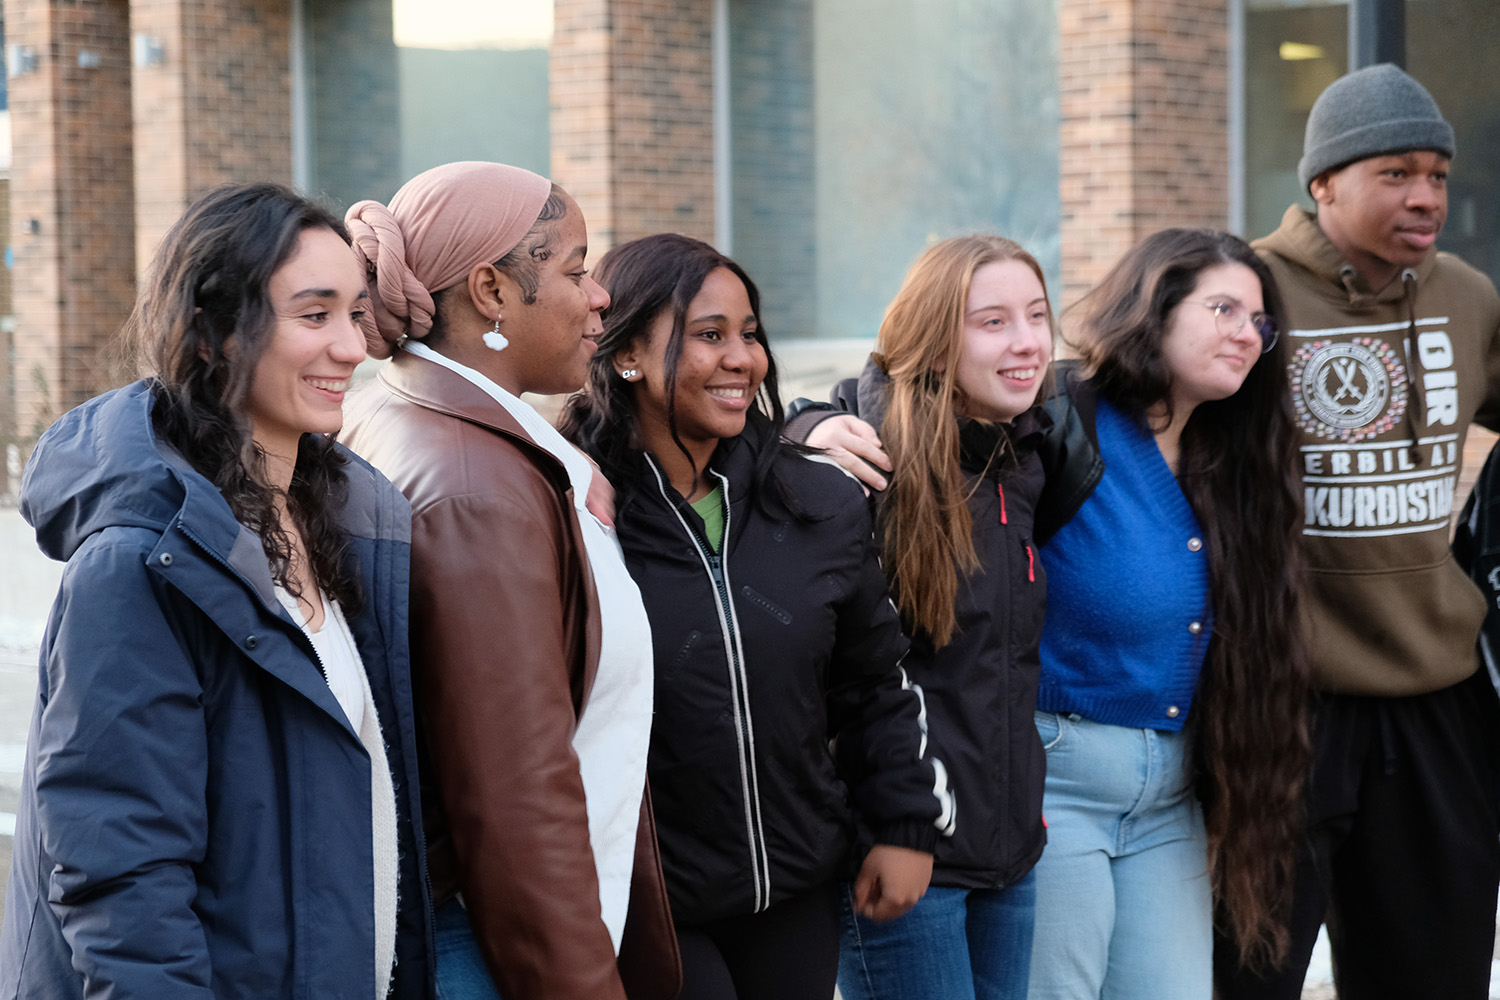 Six students stand shoulder to shoulder with arms around each other outside the campus on a cool day.